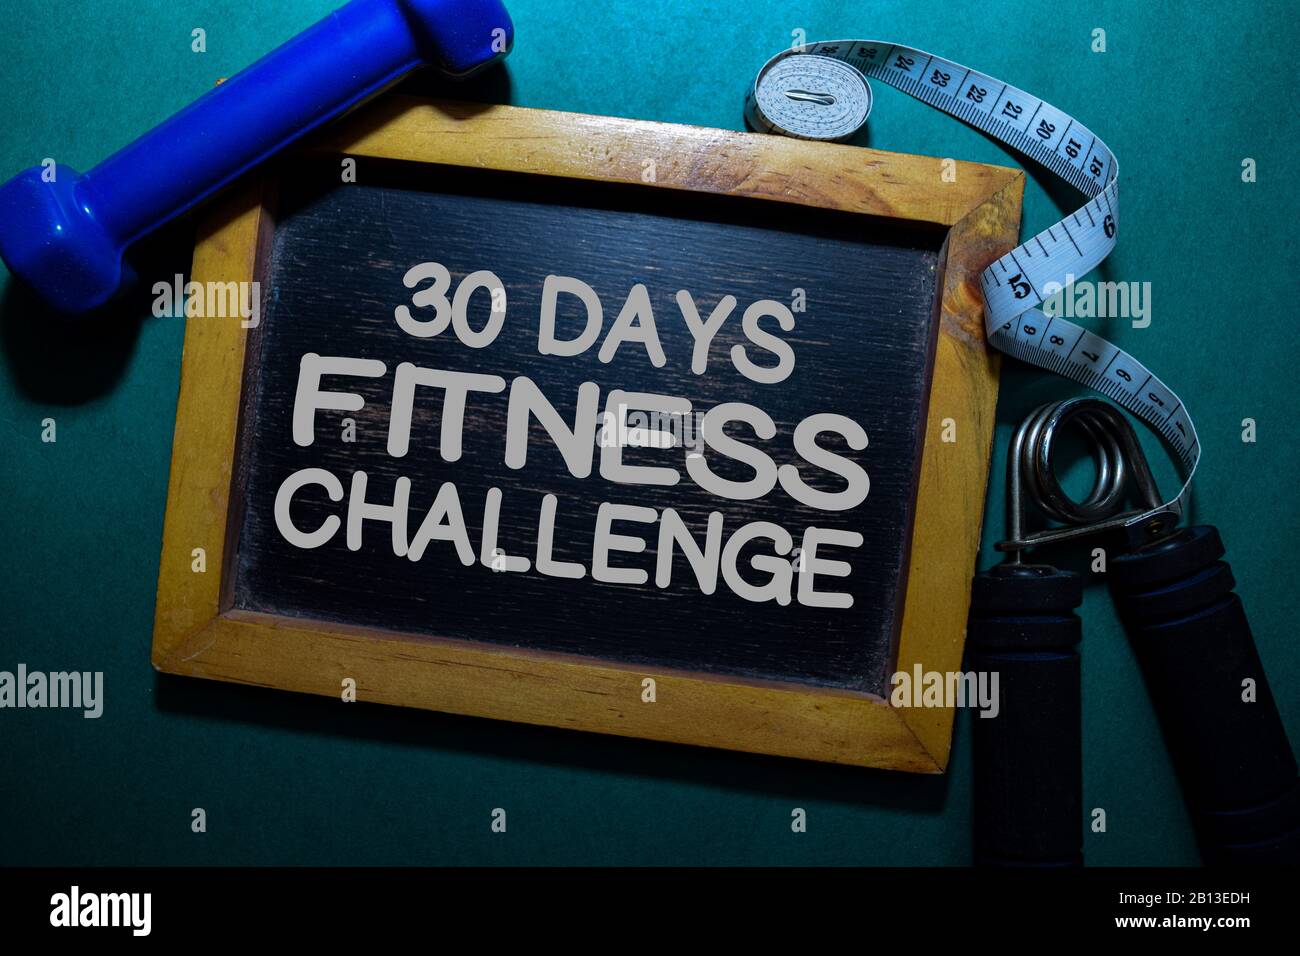 30 Days Fitness Challenge Write On A Black Board Isolated On Office Desk Stock Photo Alamy